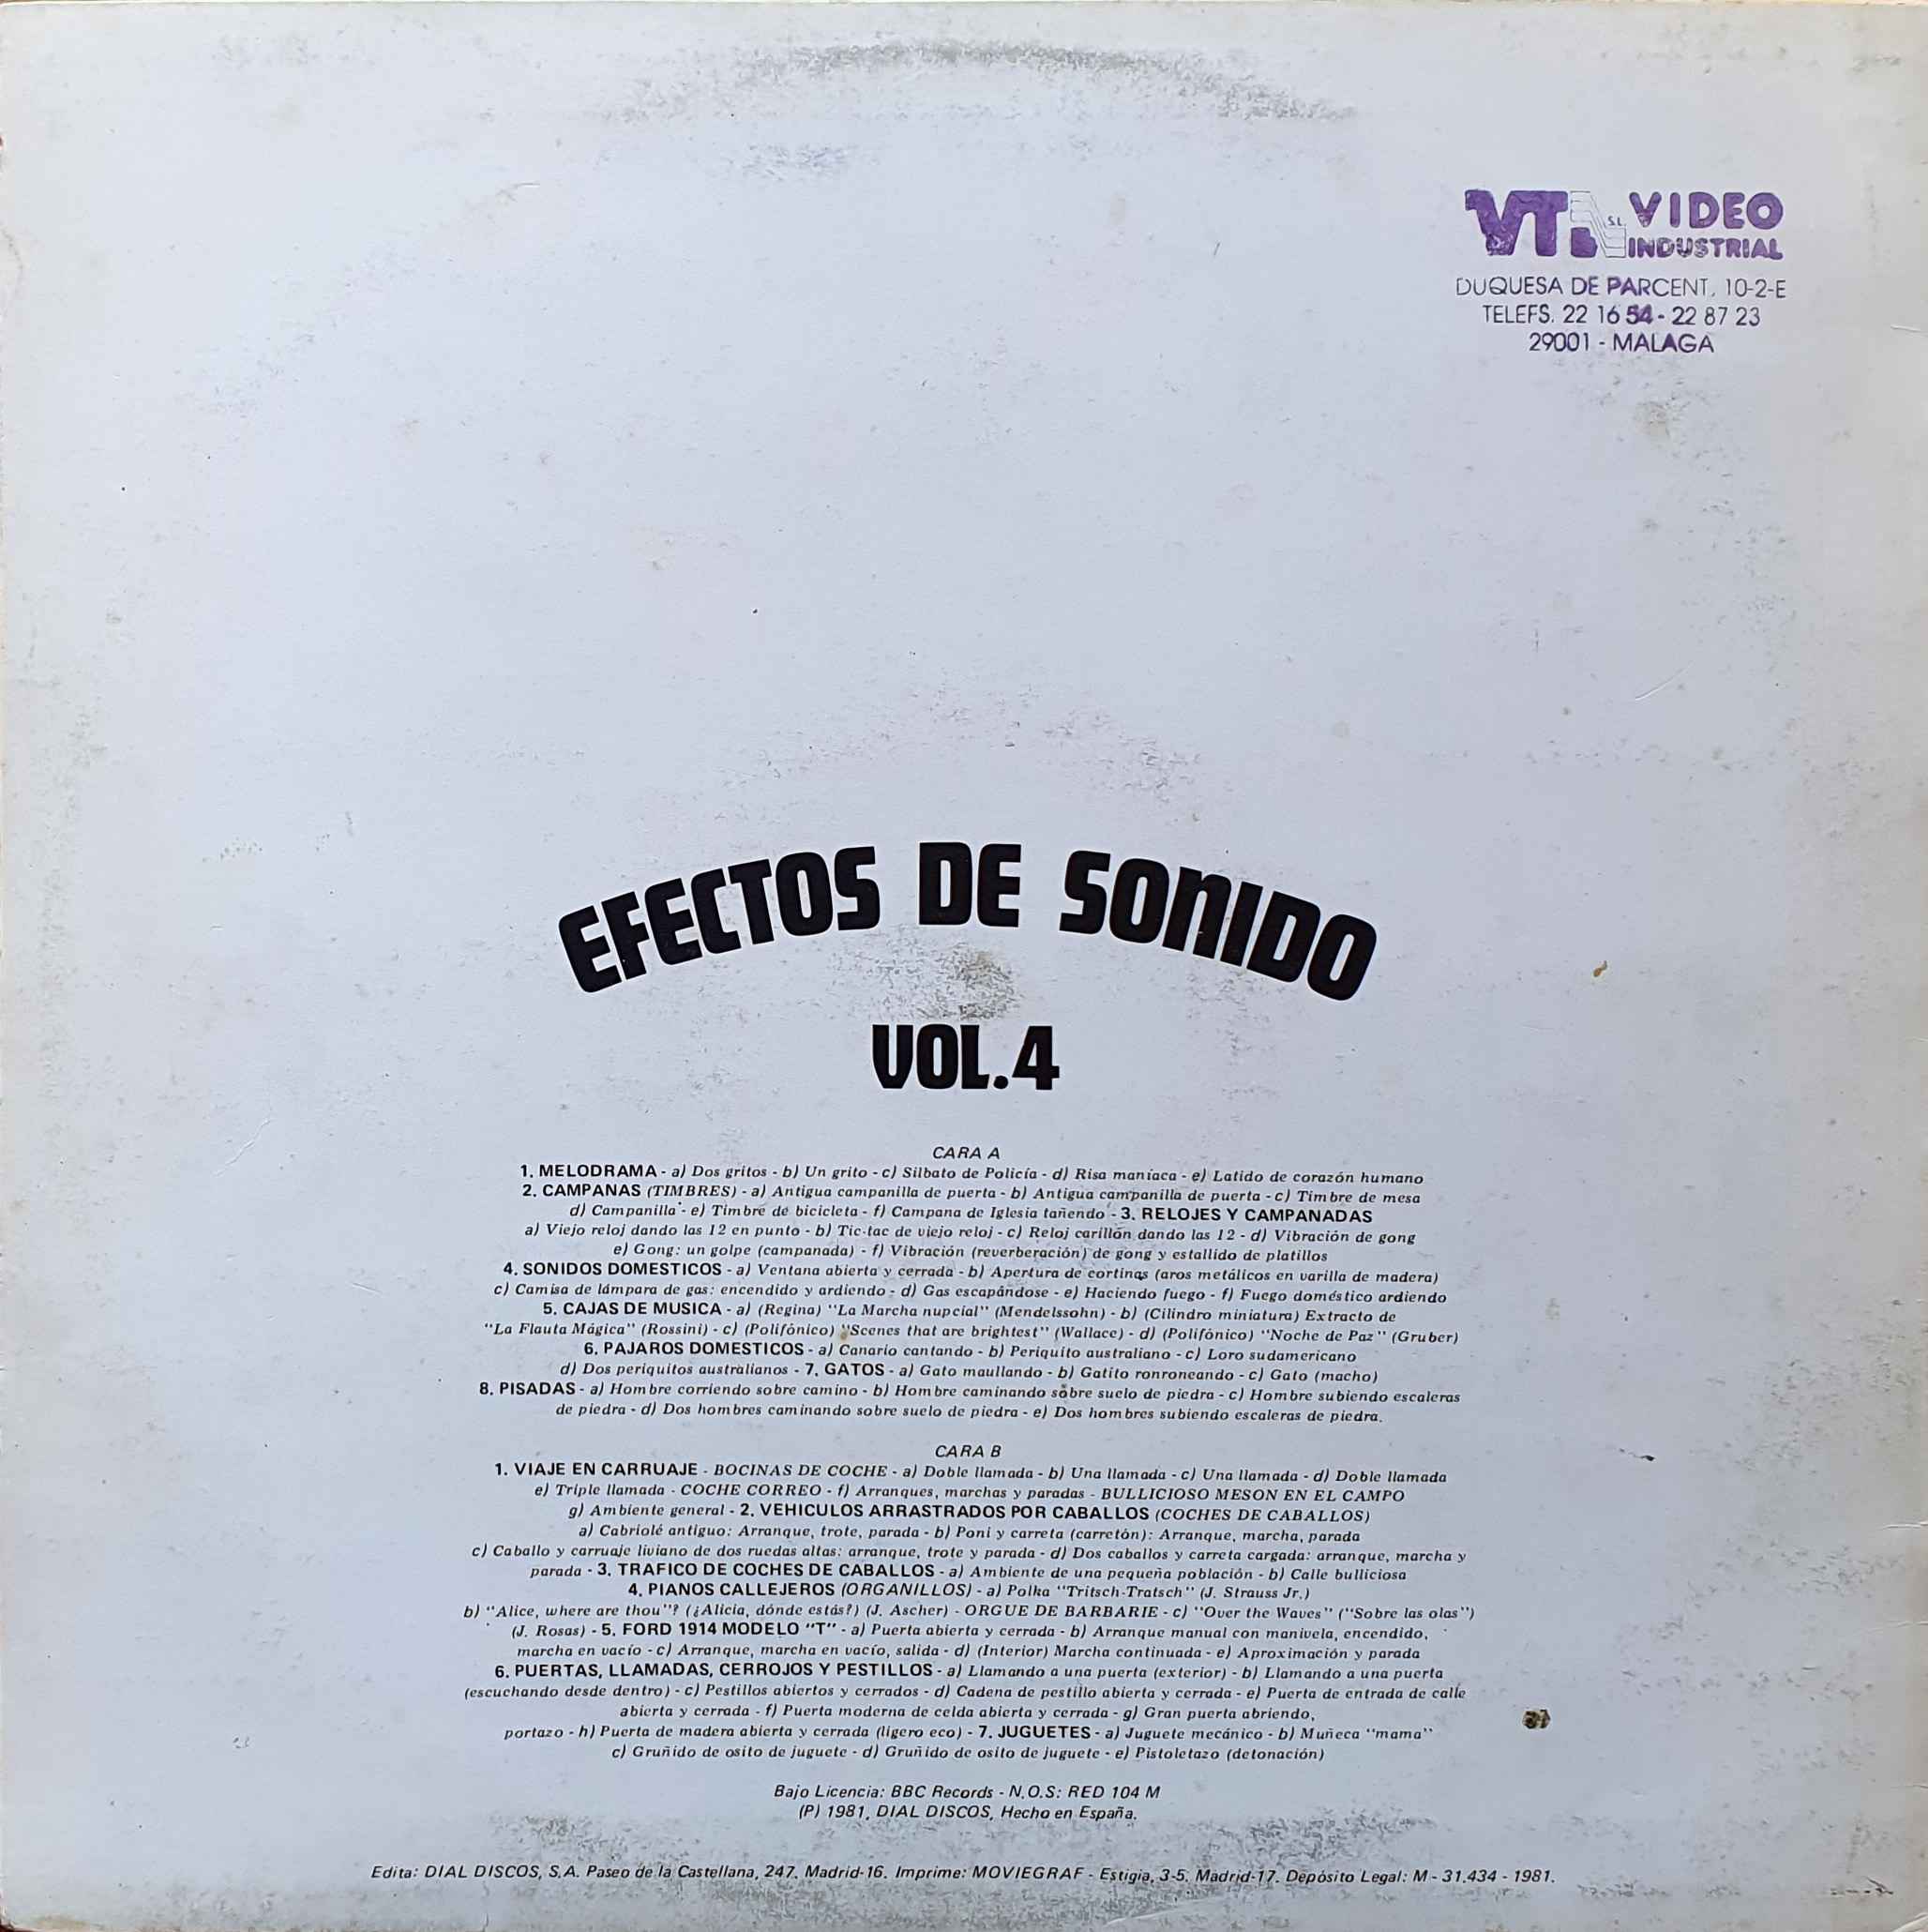 Picture of 51.0108 Efectos de sonido No 4 by artist Various from the BBC records and Tapes library